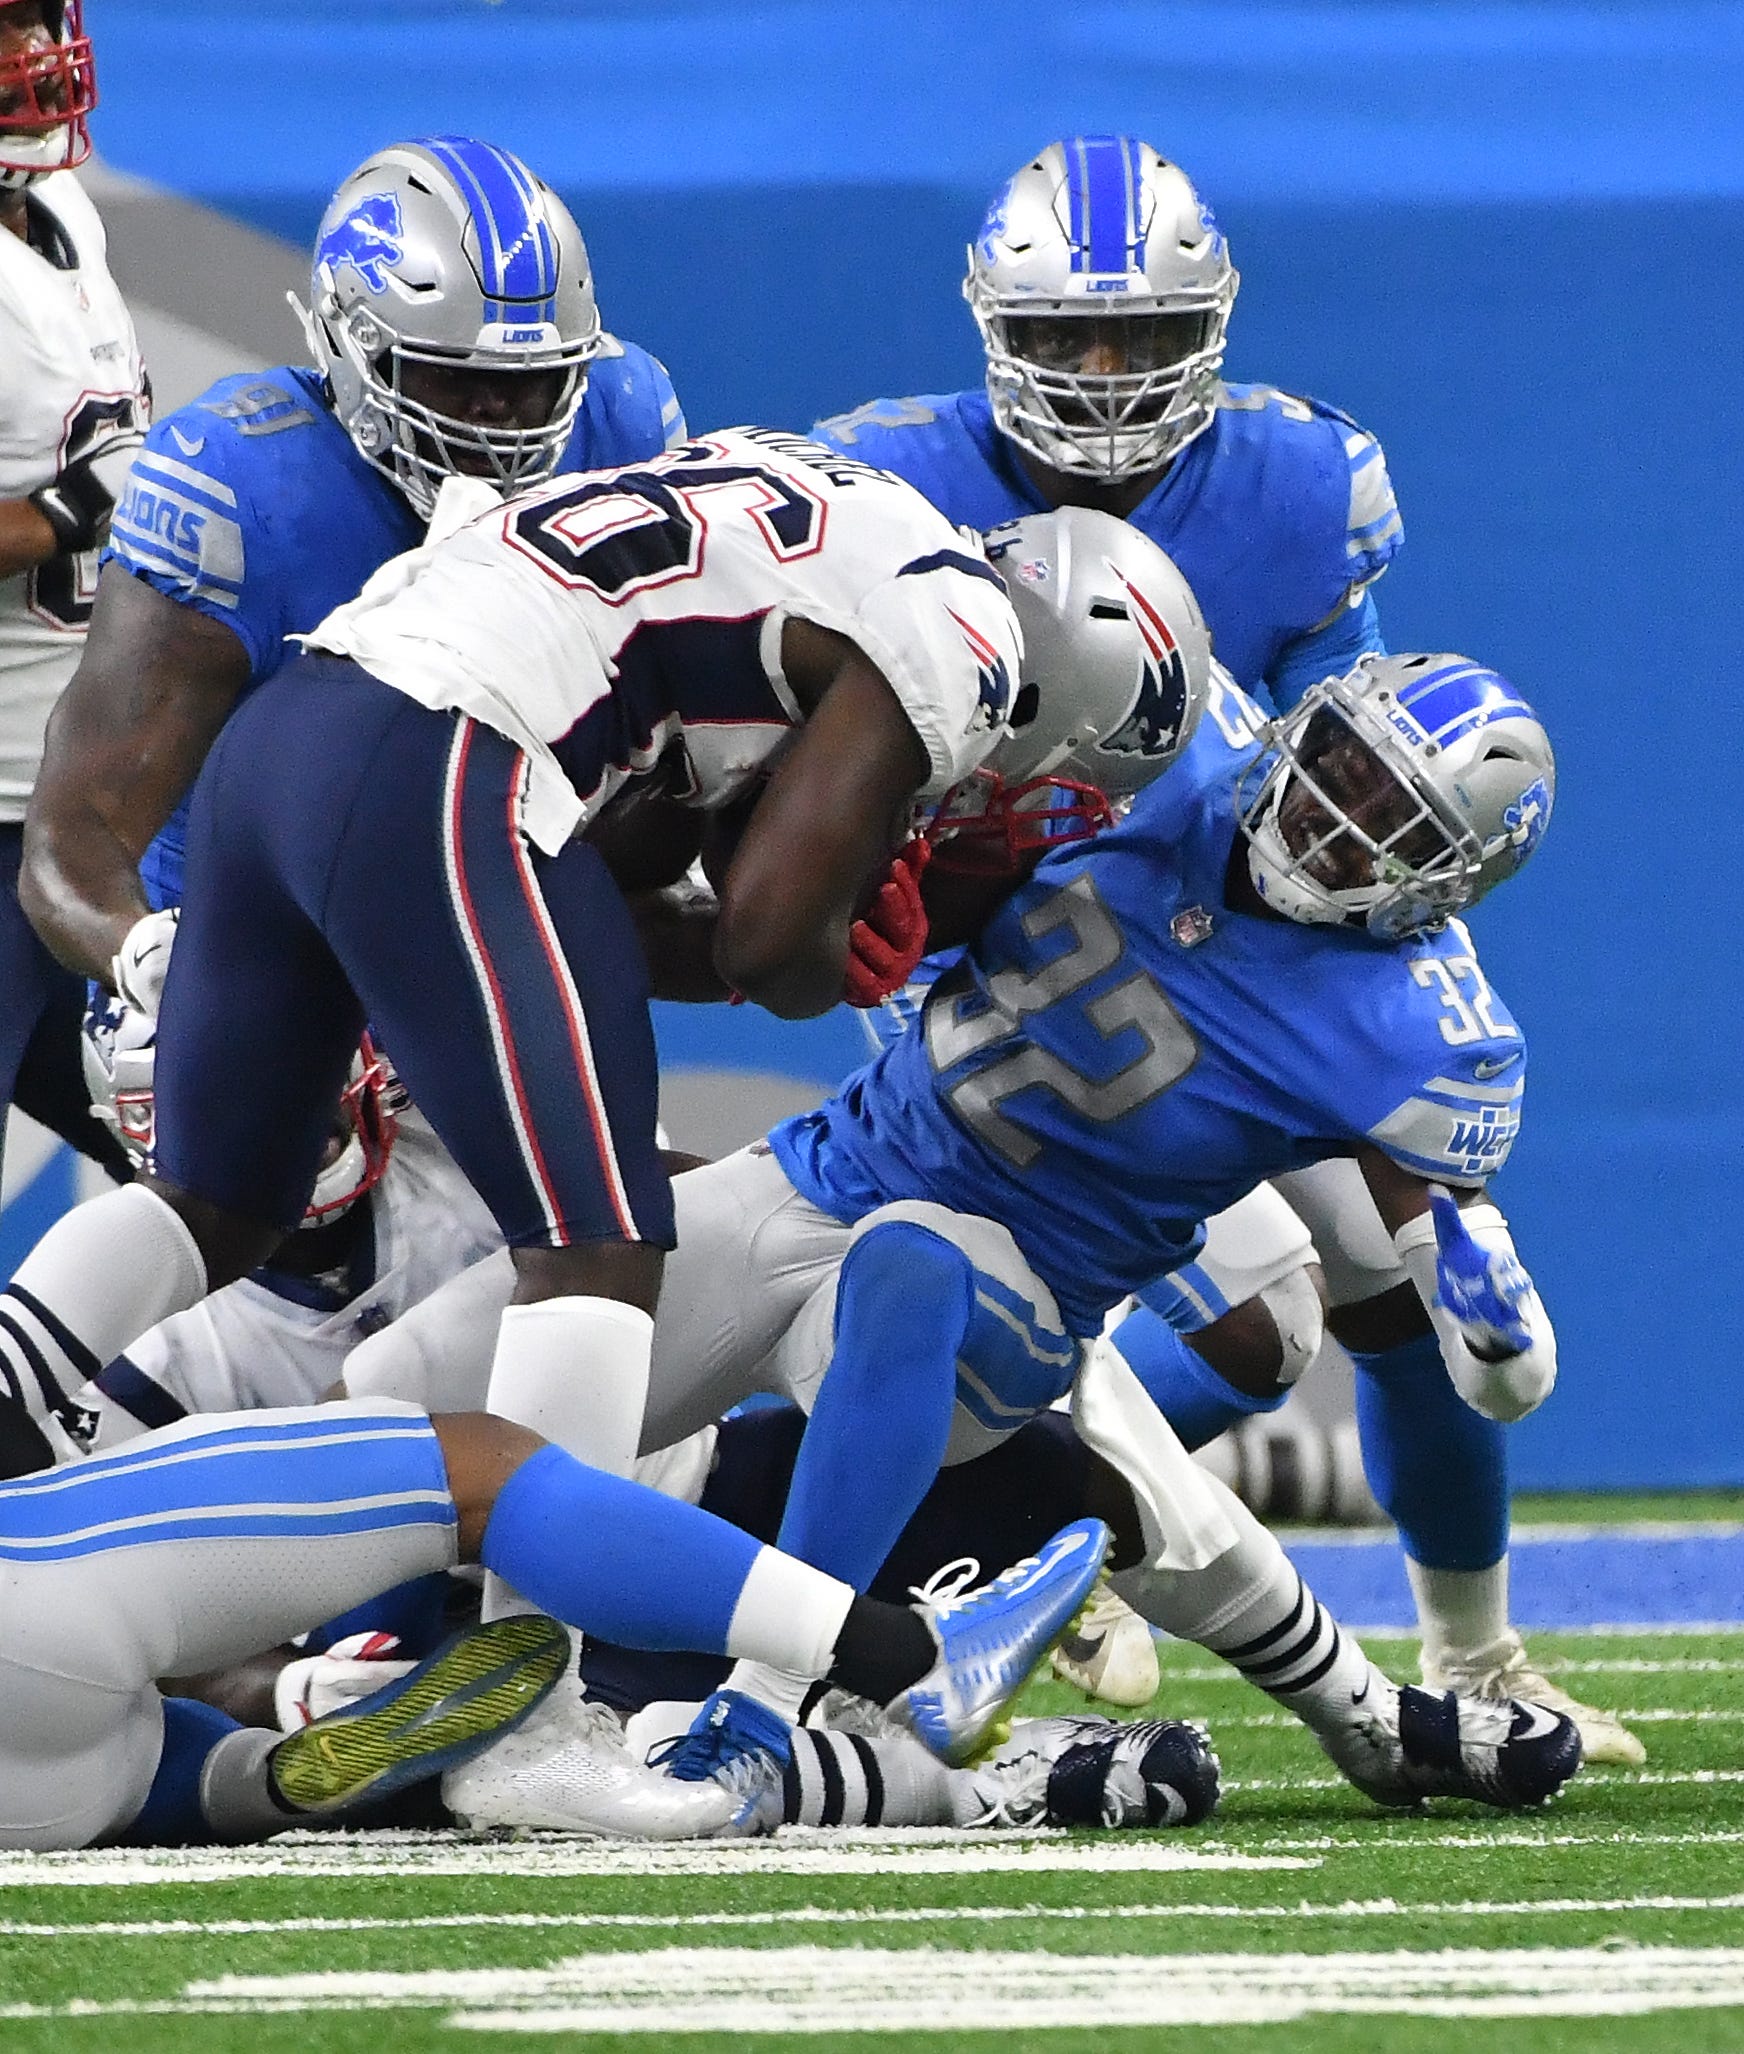 Lions ' Tavon Wilson pulls and the defense stops Patriots ' Sony Michel from making a first down on third-and-1 in the second quarter.